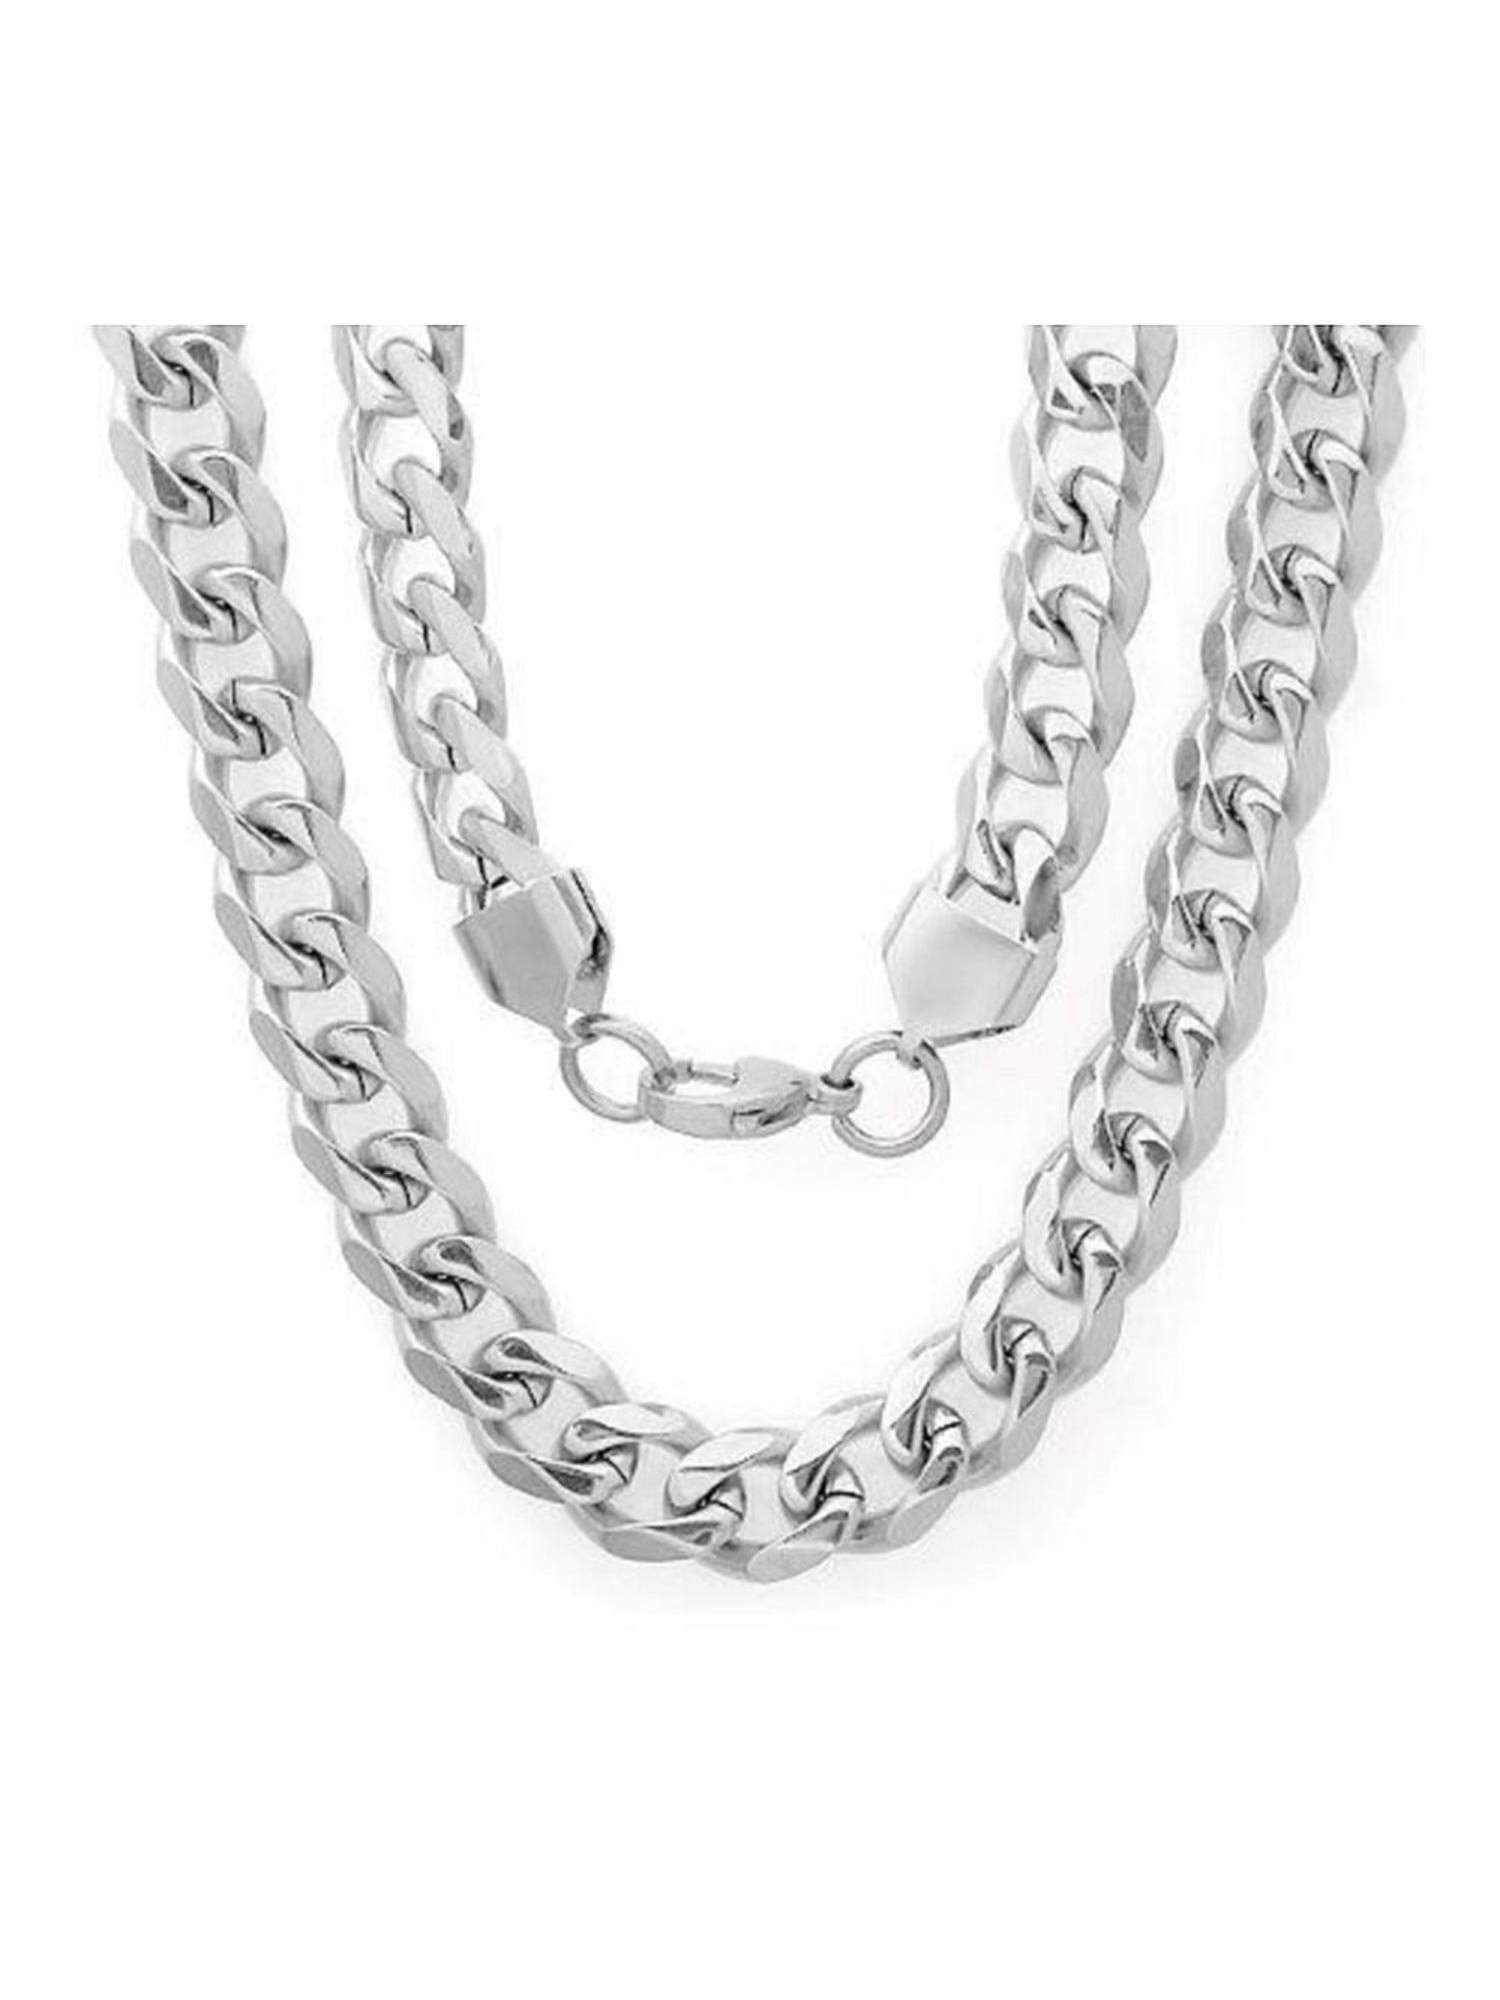 20mm with Secure Lobster Lock Clasp Jewel Tie 925 Sterling Silver 20in Black Ovals Heavy Link Necklace Chain